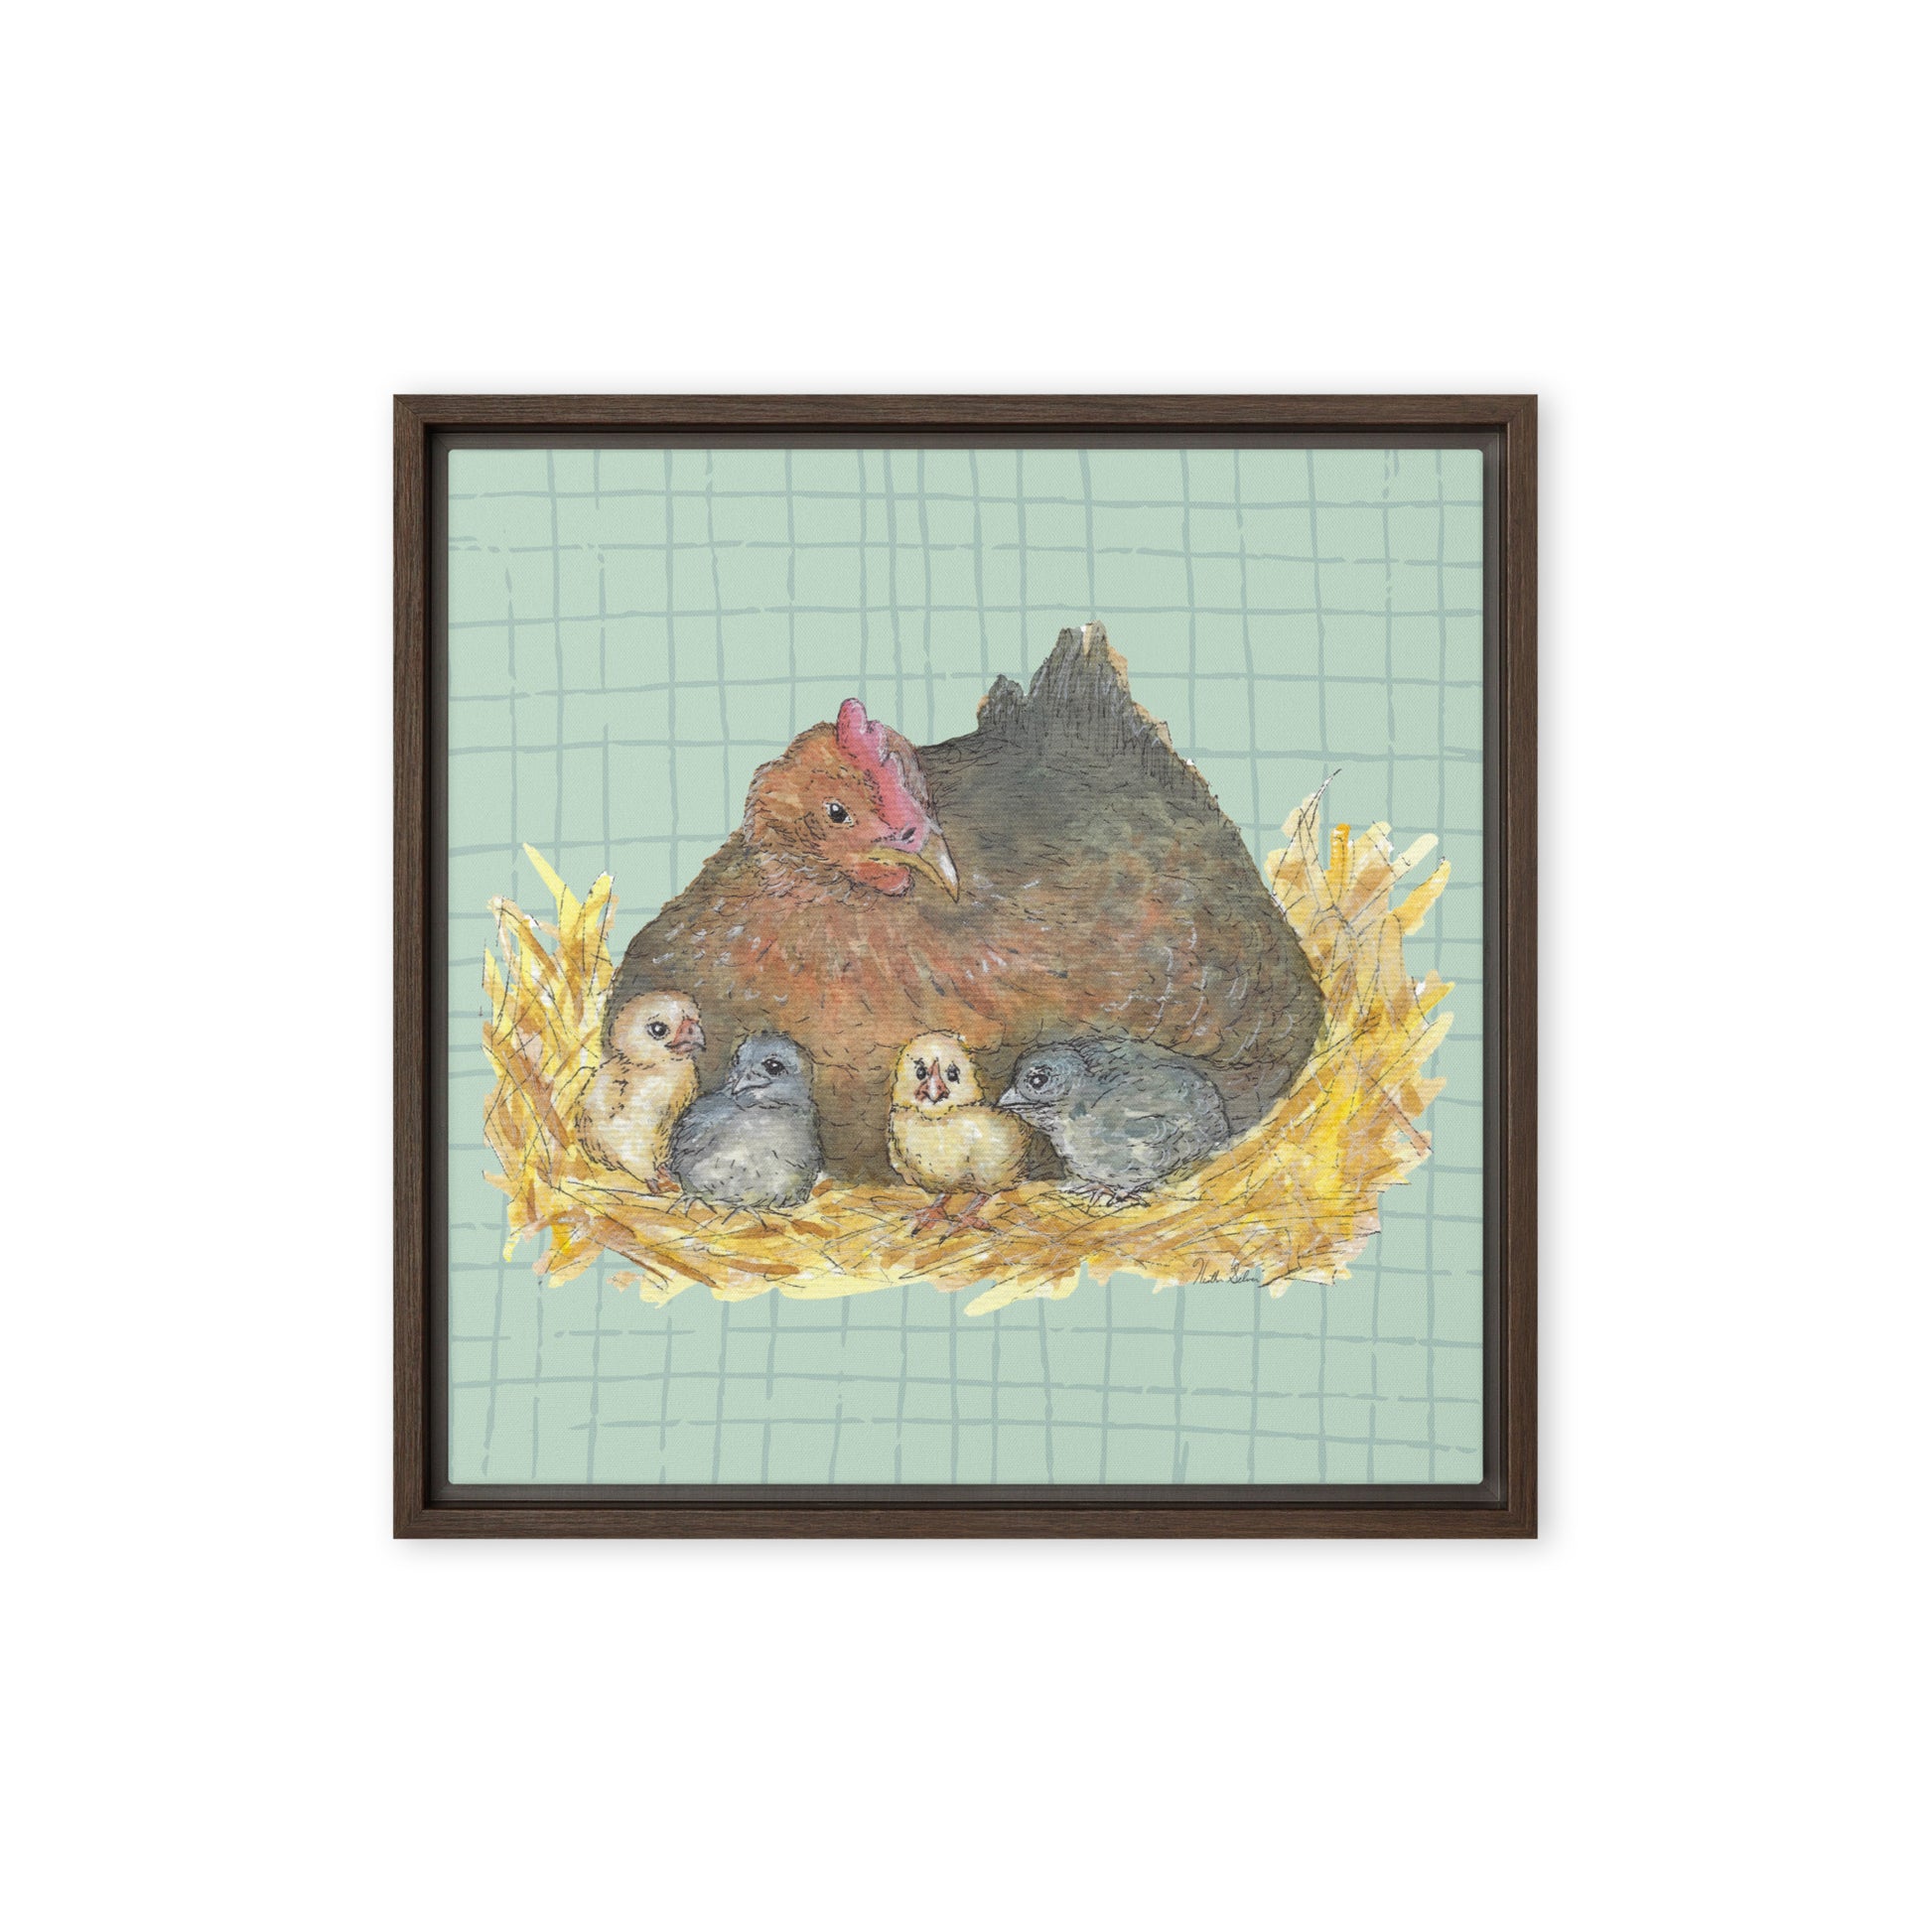 16 by 16 inch Mother Hen Floating Frame Canvas Wall Art. Heather Silver's watercolor painting, Mother Hen, with a green crosshatched background, printed on a stretched canvas and framed with a dark brown pine frame. Hanging hardware included.